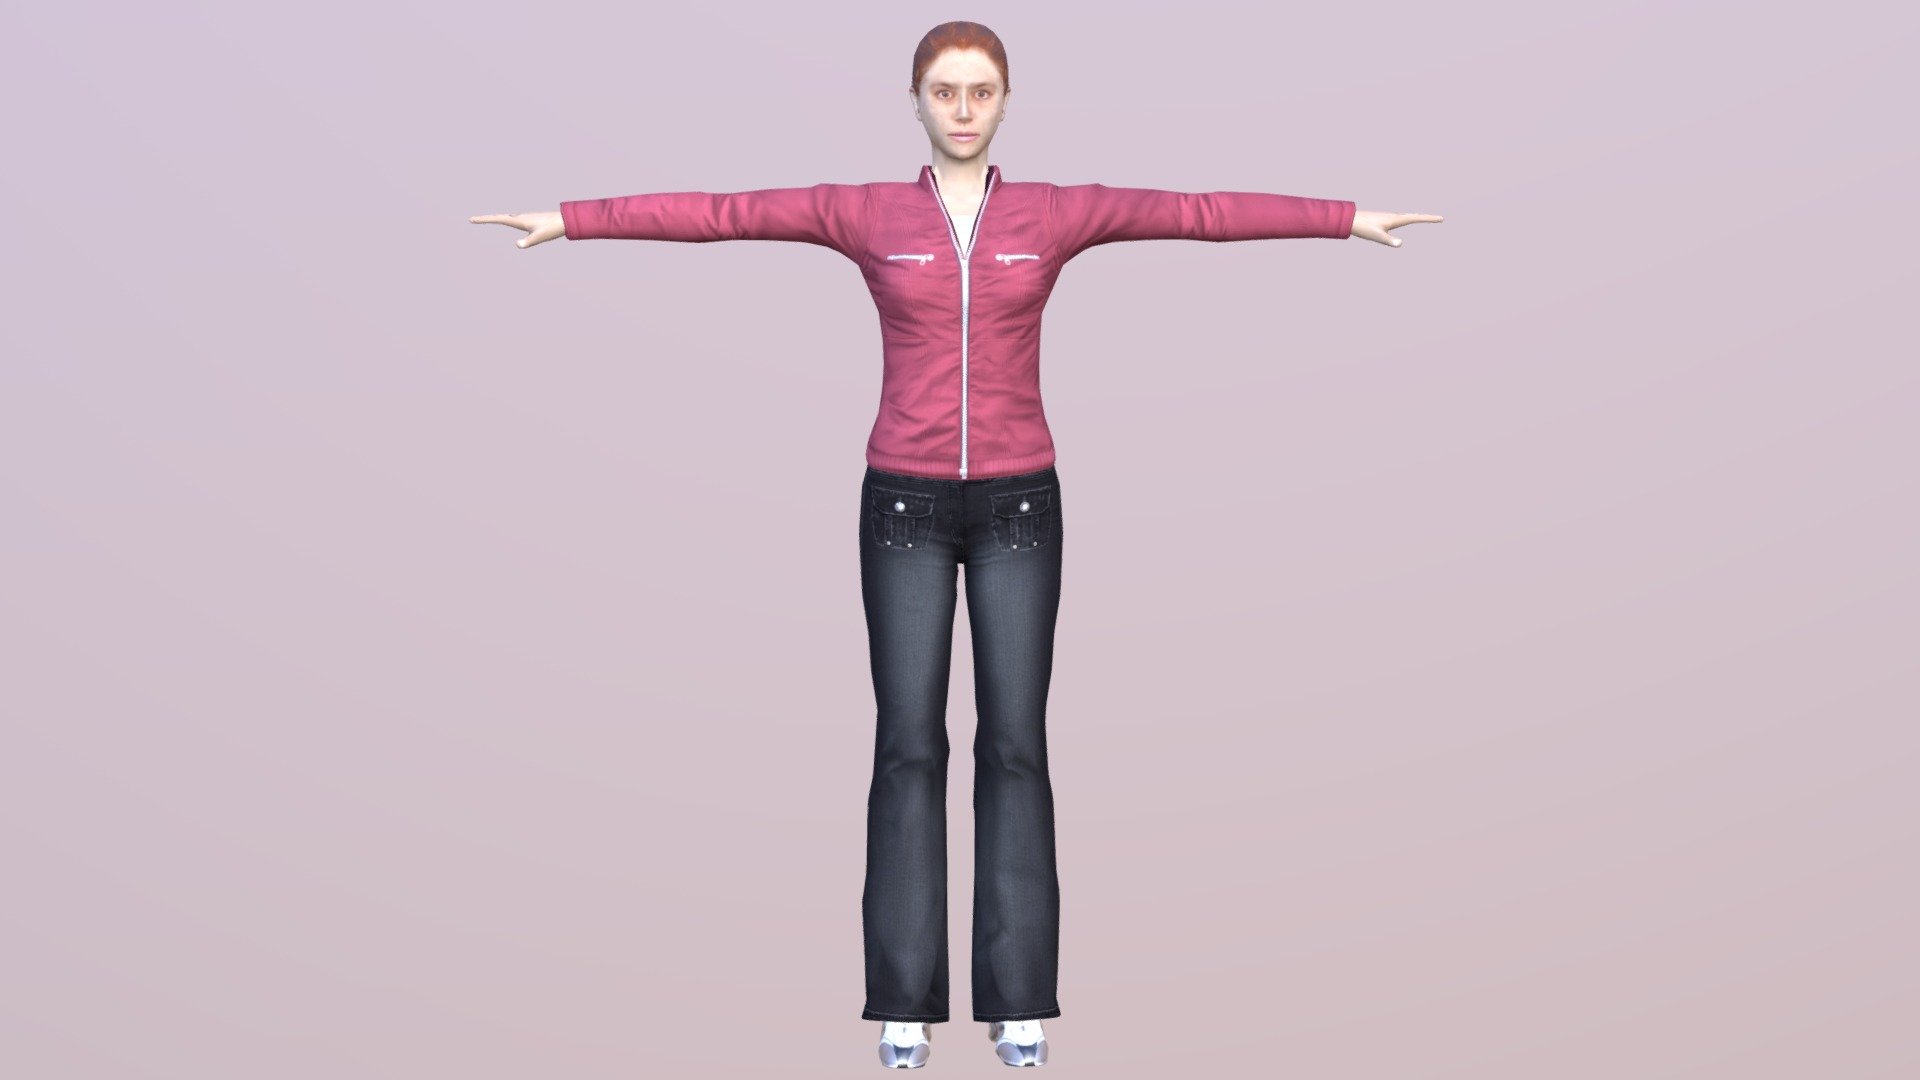 FOR FULL DETAILS+PREVIEW - LINK


Woman_44
(LOW POLY FEMALE CHARACTER WITH 32 MORPHS + 52 ANIMATIONS)

FEATURES




LOW POLY / RIGGED / ANIMATED

BONE RIG

UNREAL ENGINE EPIC SKELETON+EXTRA BONES (SKELETON TREE IN PREVIEW IMAGES)

AVAILABLE POSES=T-POSE,UE4 POSE, A-POSE

SUPPORT ANIMATIONS FROM THE UNREAL MANNEQUIN

52 ANIMATIONS,32 MORPH (LISTED IN PREVIEW)

ANIMATIONS ARE AVAILABLE IN BOTH ROOT MOTION &amp; IN-PLACE

04 LOD GROUPS

SINGLE MATERIAL FOR WHOLE BODY

PBR 4K TEXTURES

UNWRAPPED UV

AVAILABLE FILE FORMATS




UNREAL ENGINE-4.25

UNITY-2022

3DS MAX-2017

MAYA-2017

BLENDER-3.2

CINEMA 4D-R21

FBX&ndash;BOTH Z-UP &amp; Y-UP

OBJ

POLY COUNT




LOD0- 6523(POLYGON,TRIANGLES) 3376(VERTICES)

LOD1-80%

LOD2-50%

LOD3-30%

TEXTURE RESOLUTION




DIFFUSE

NORMAL_MAP

SPECULAR

ROUGHNESS 

ALL TEXTURES IN 4096X4096 - Woman 44 With 52 Animations 32 Morphs - Buy Royalty Free 3D model by jasirkt 3d model